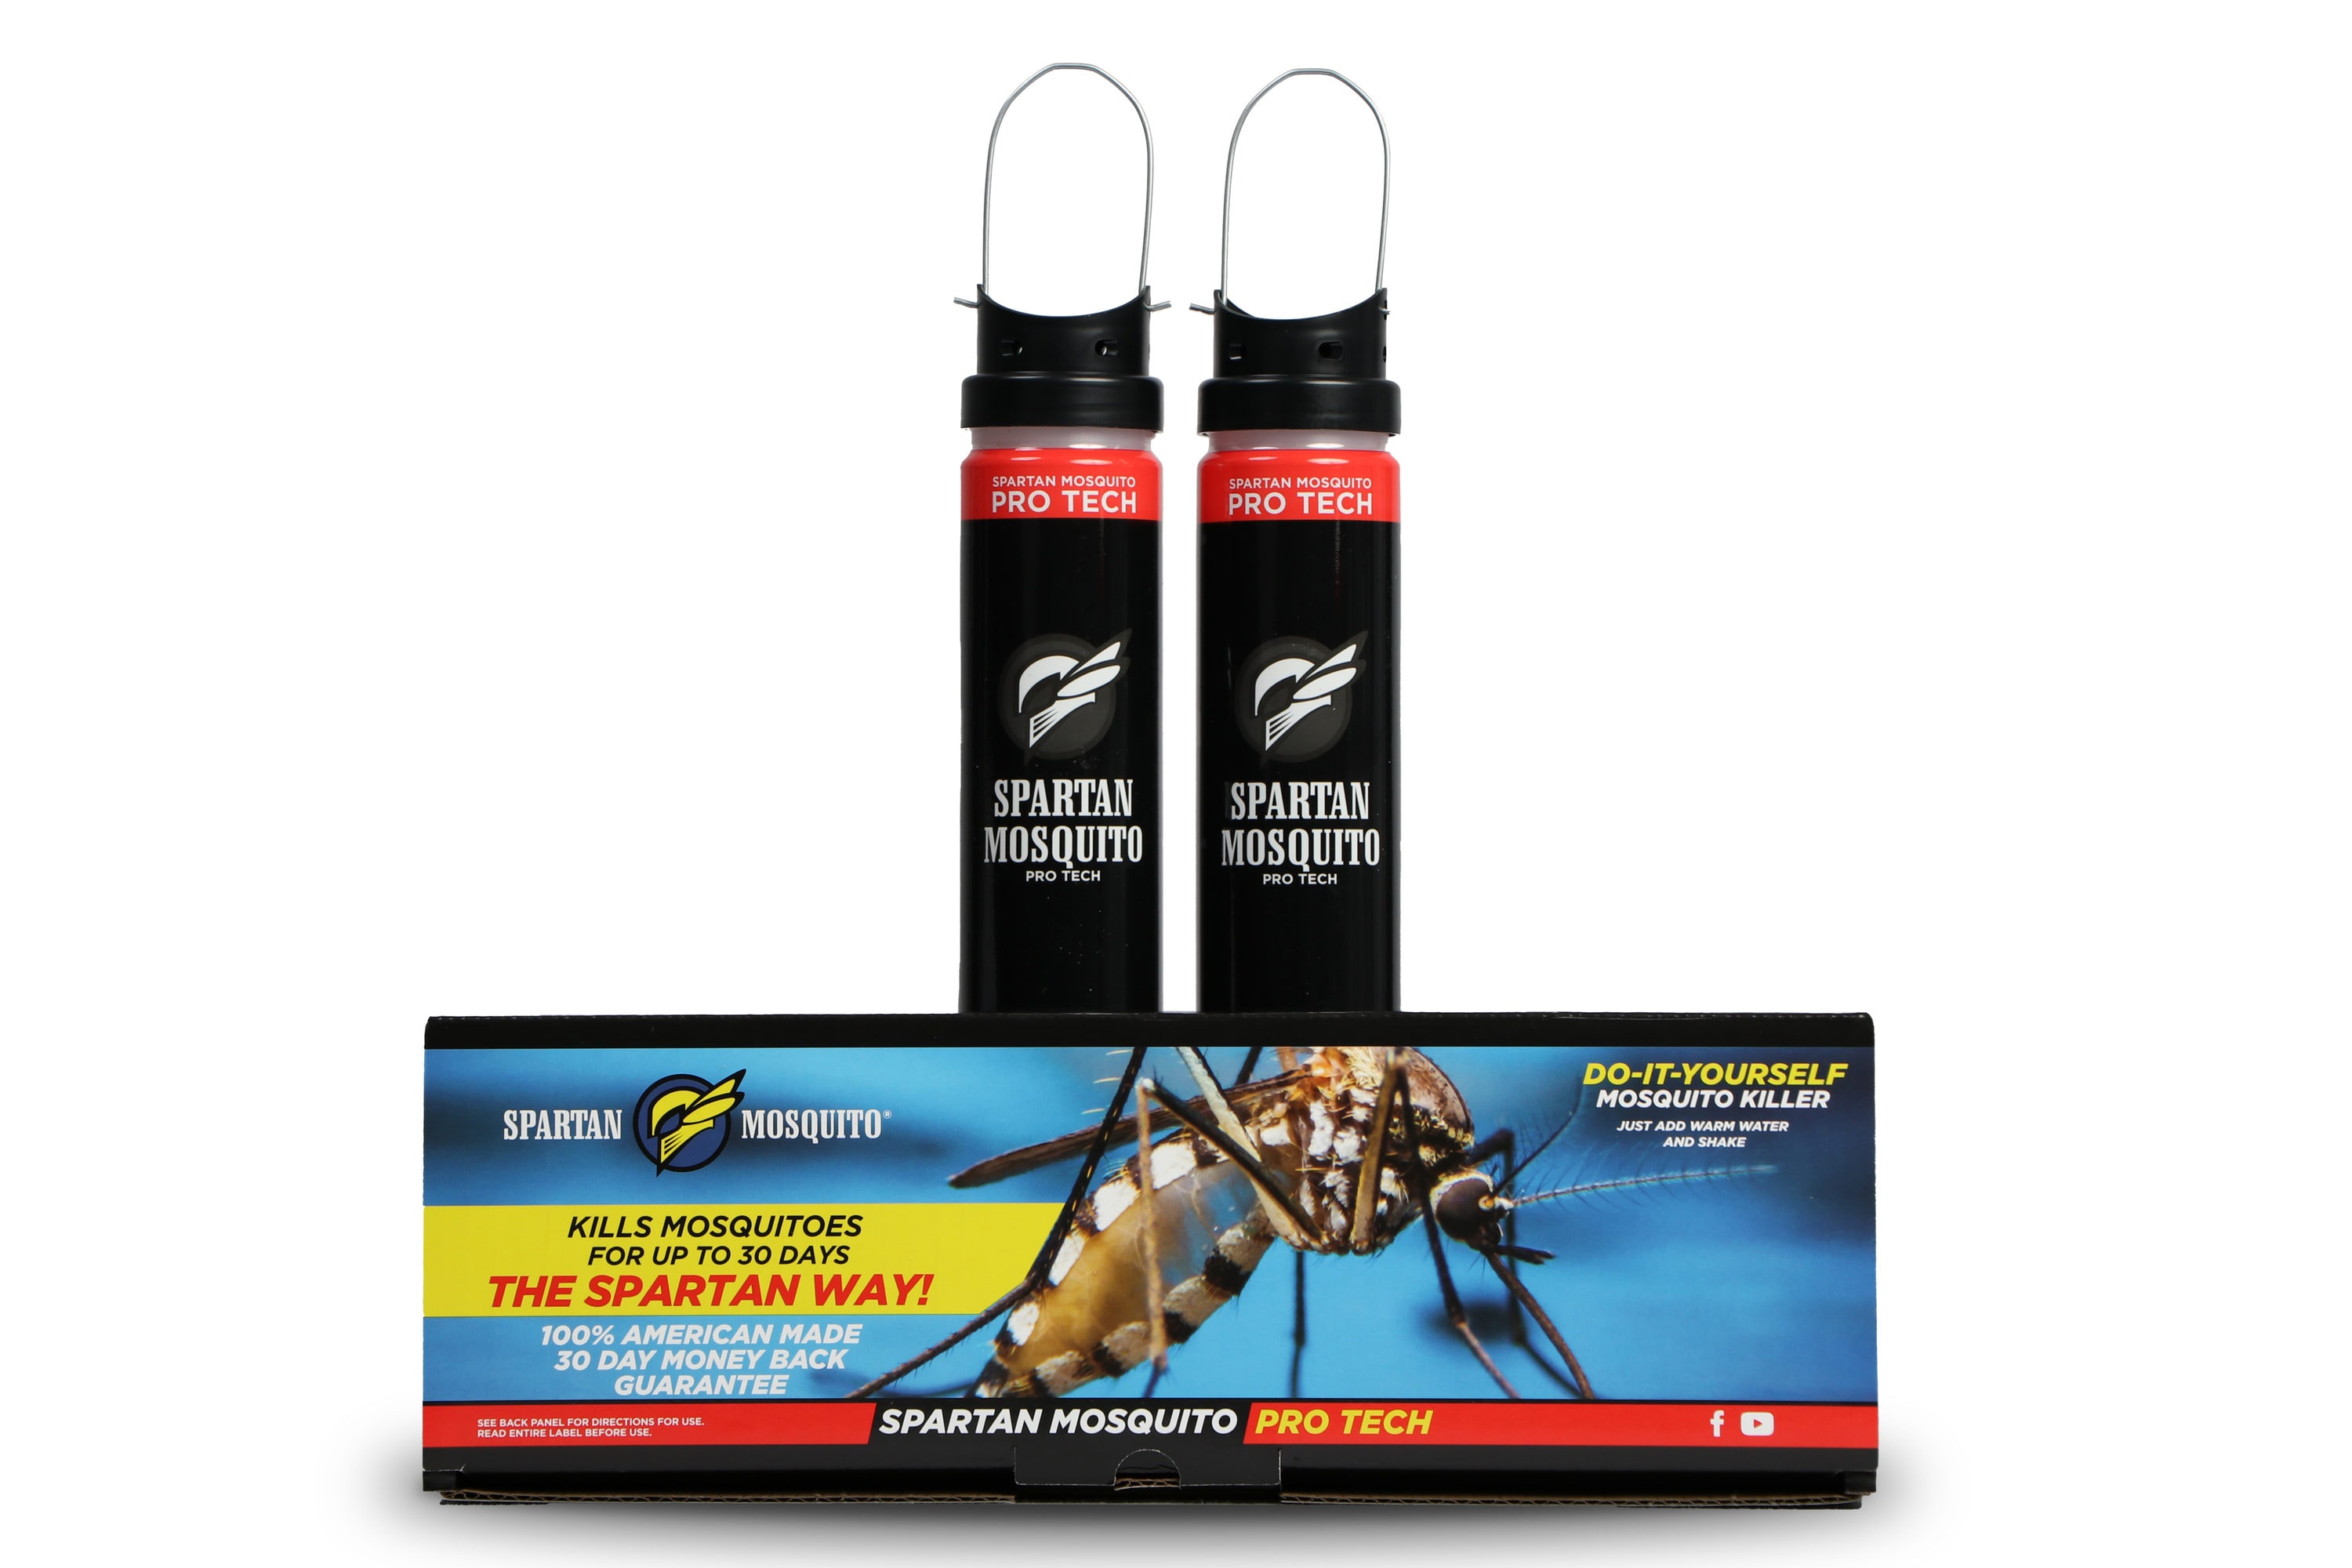  BioCare Ladybug Lures, Nontoxic and Pesticide-Free, Made in  USA, 4 Count, Brown - S702 : Home Pest Control Products : Patio, Lawn &  Garden